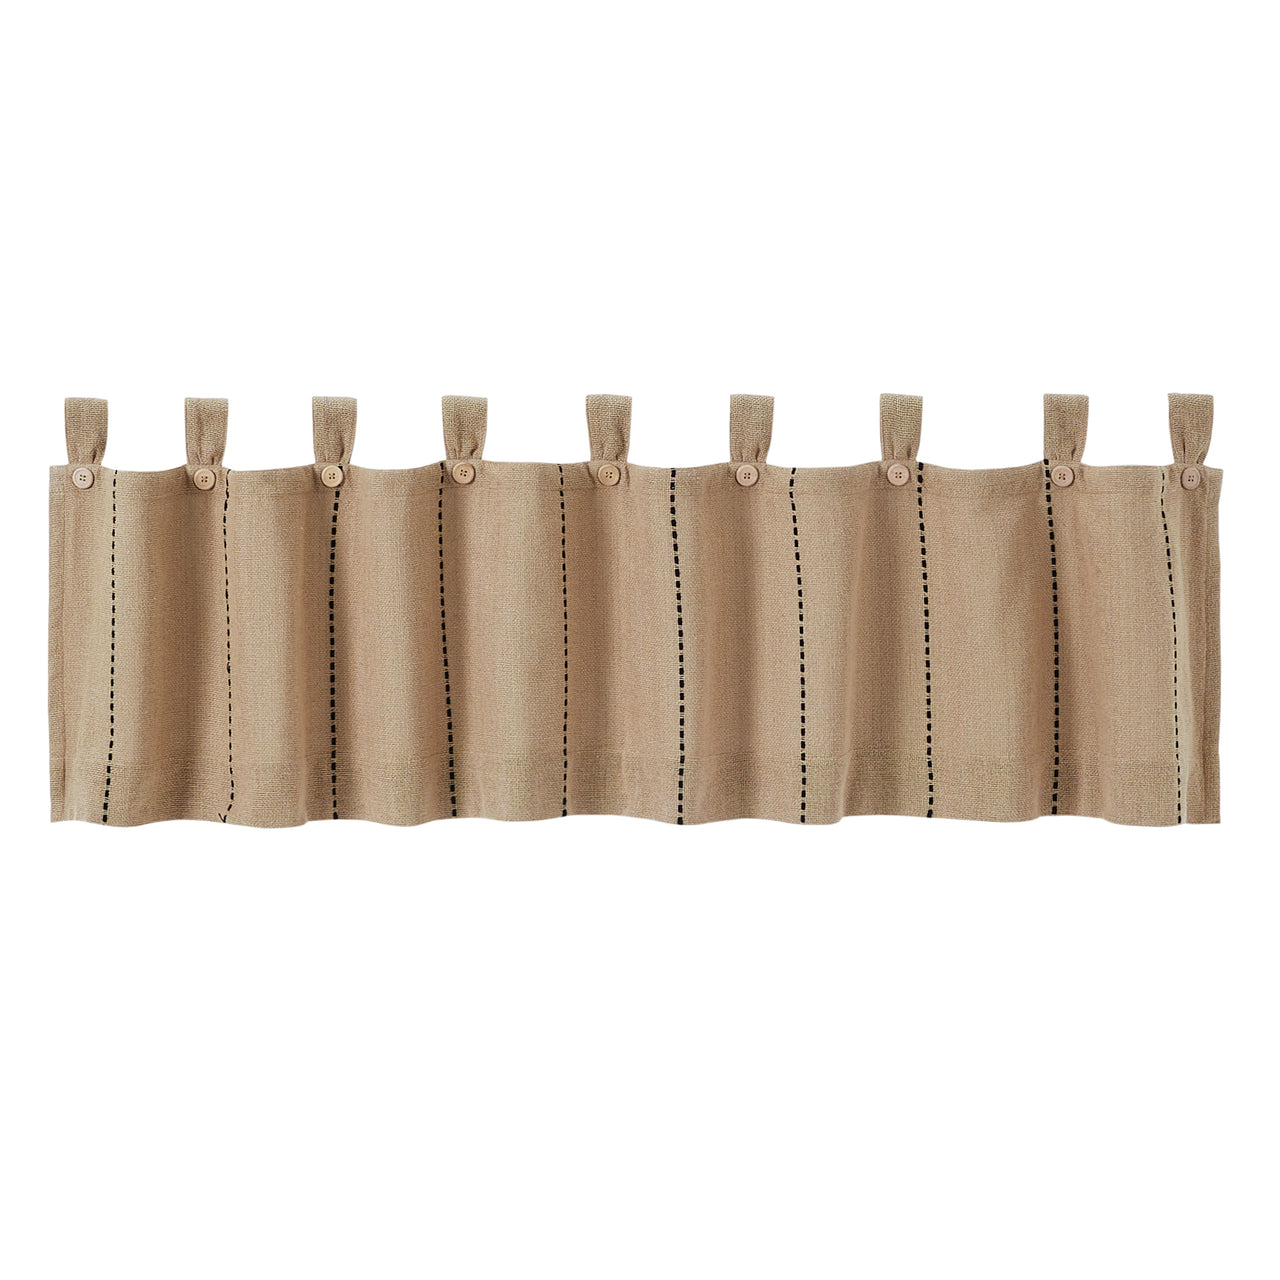 Stitched Burlap Natural Valance Curtain 16x72 VHC Brands